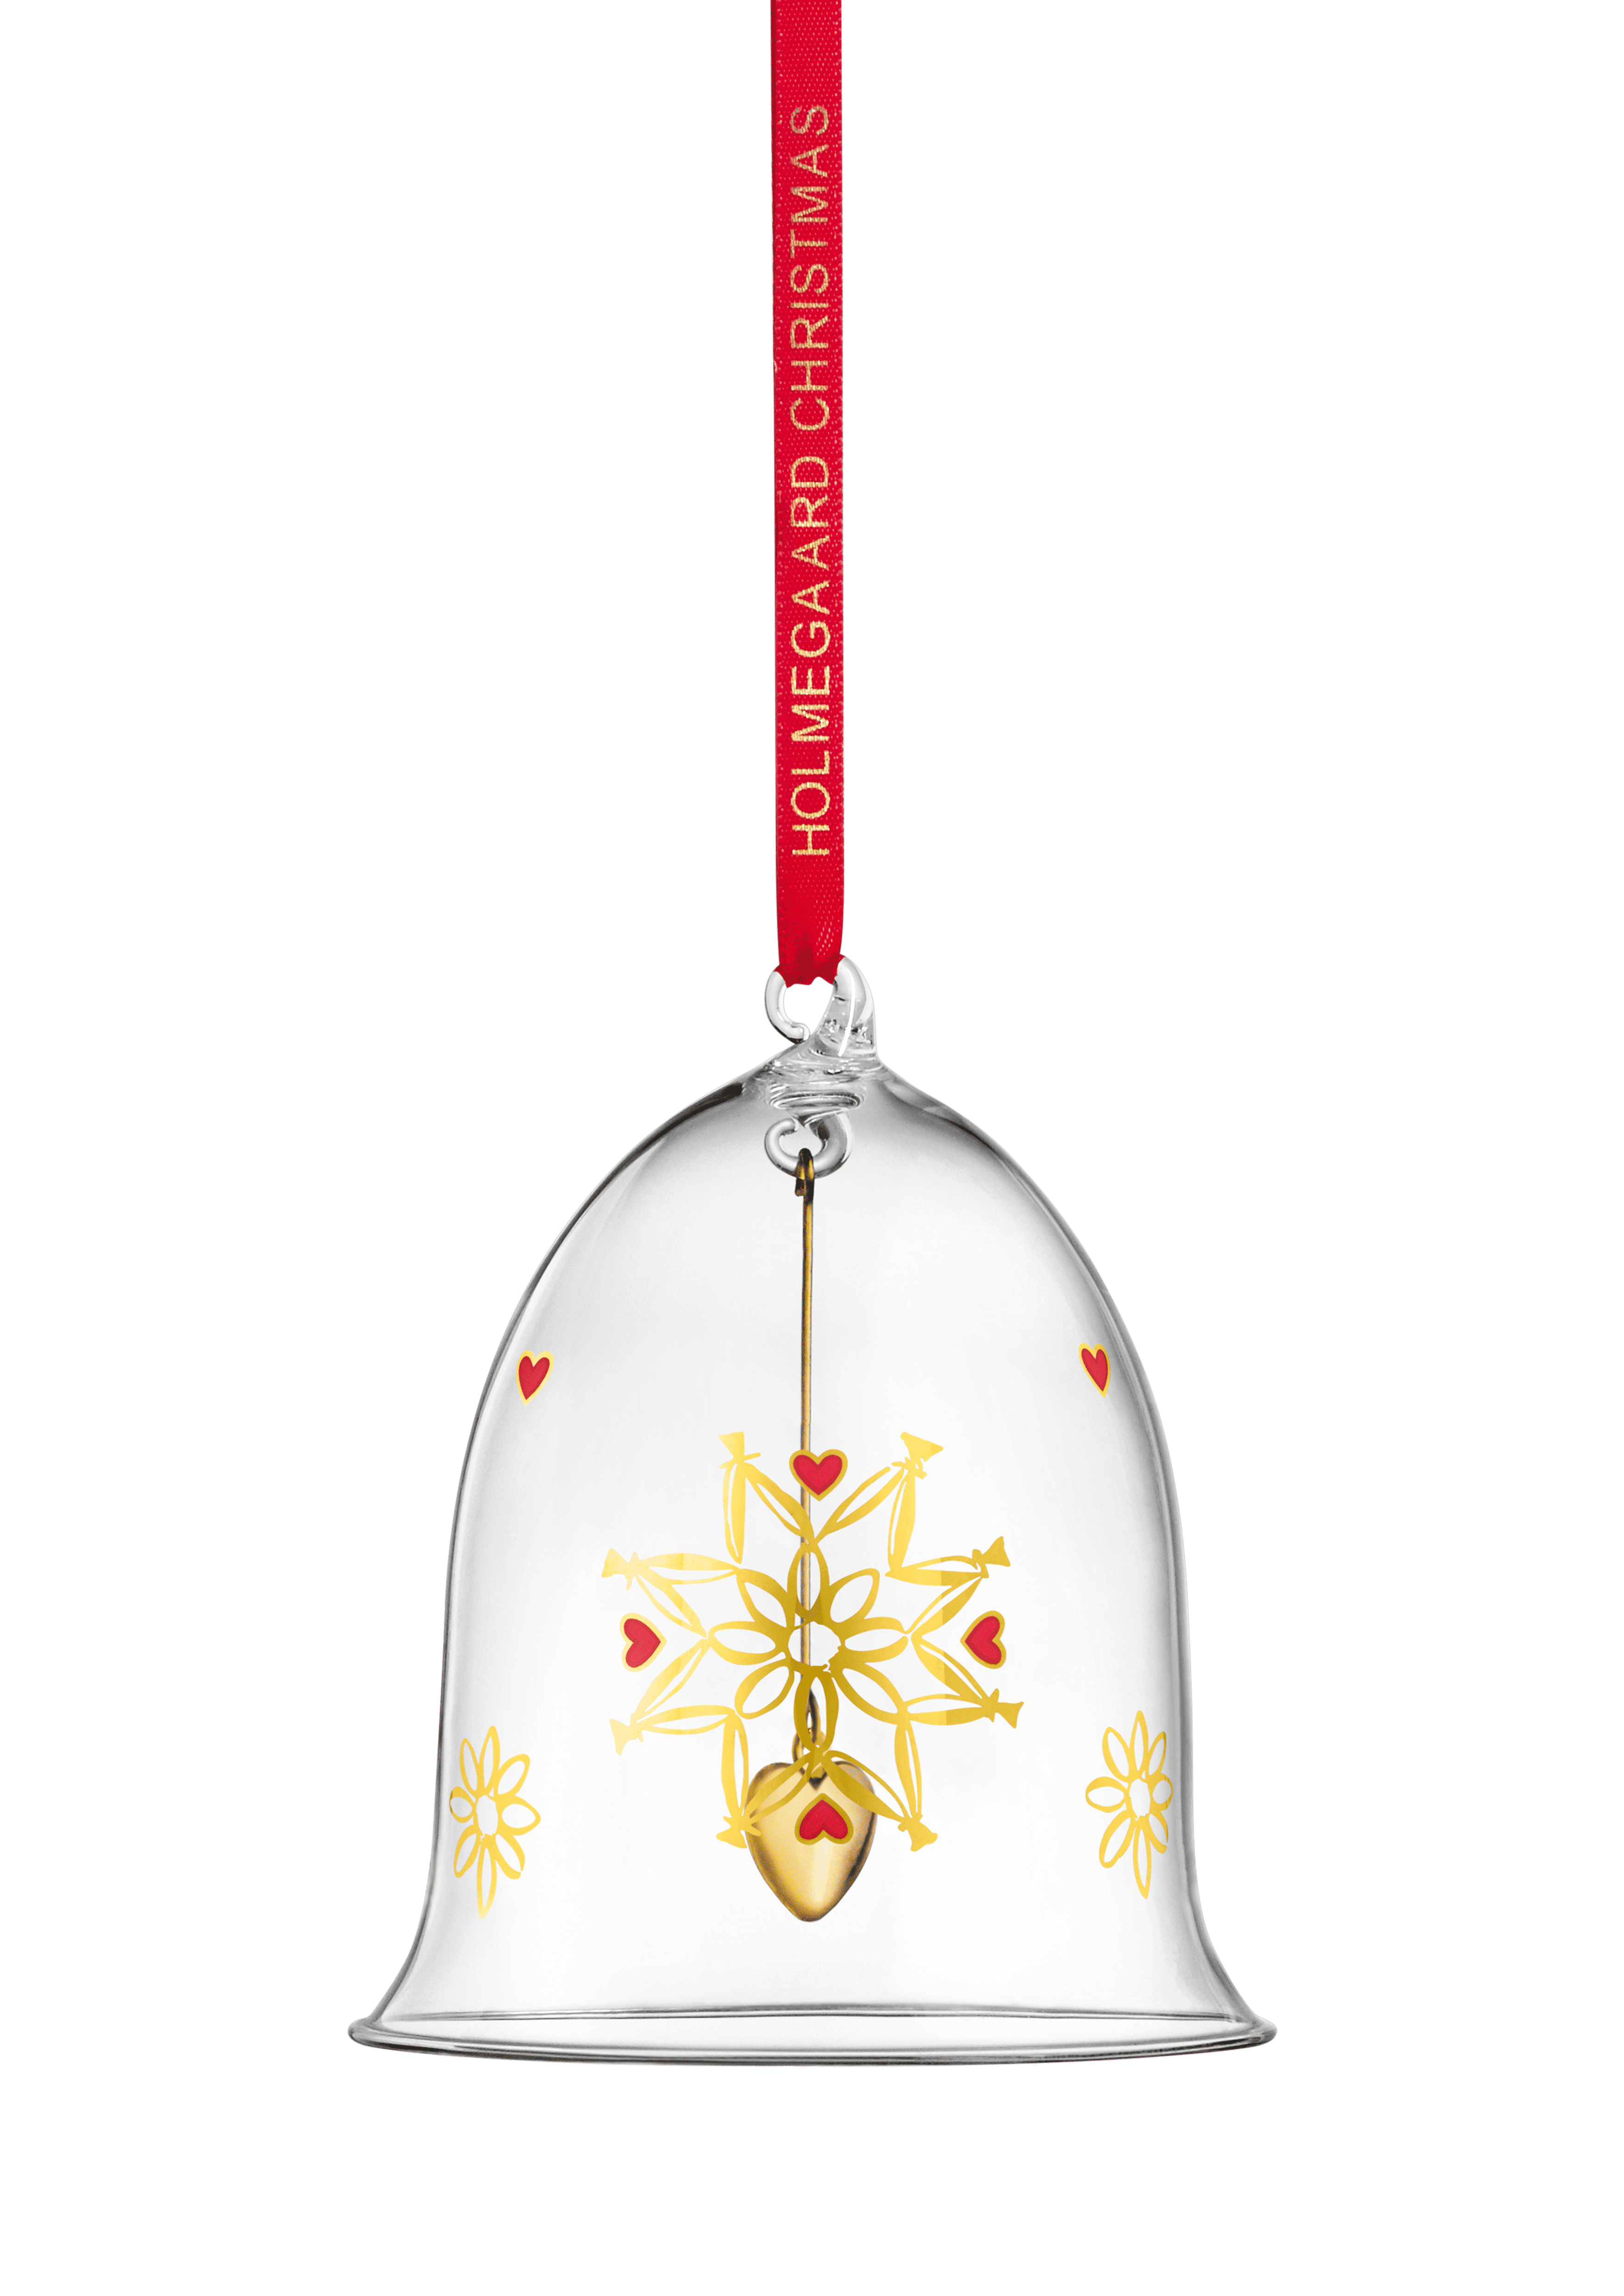 Annual Christmas Bell 2021 large